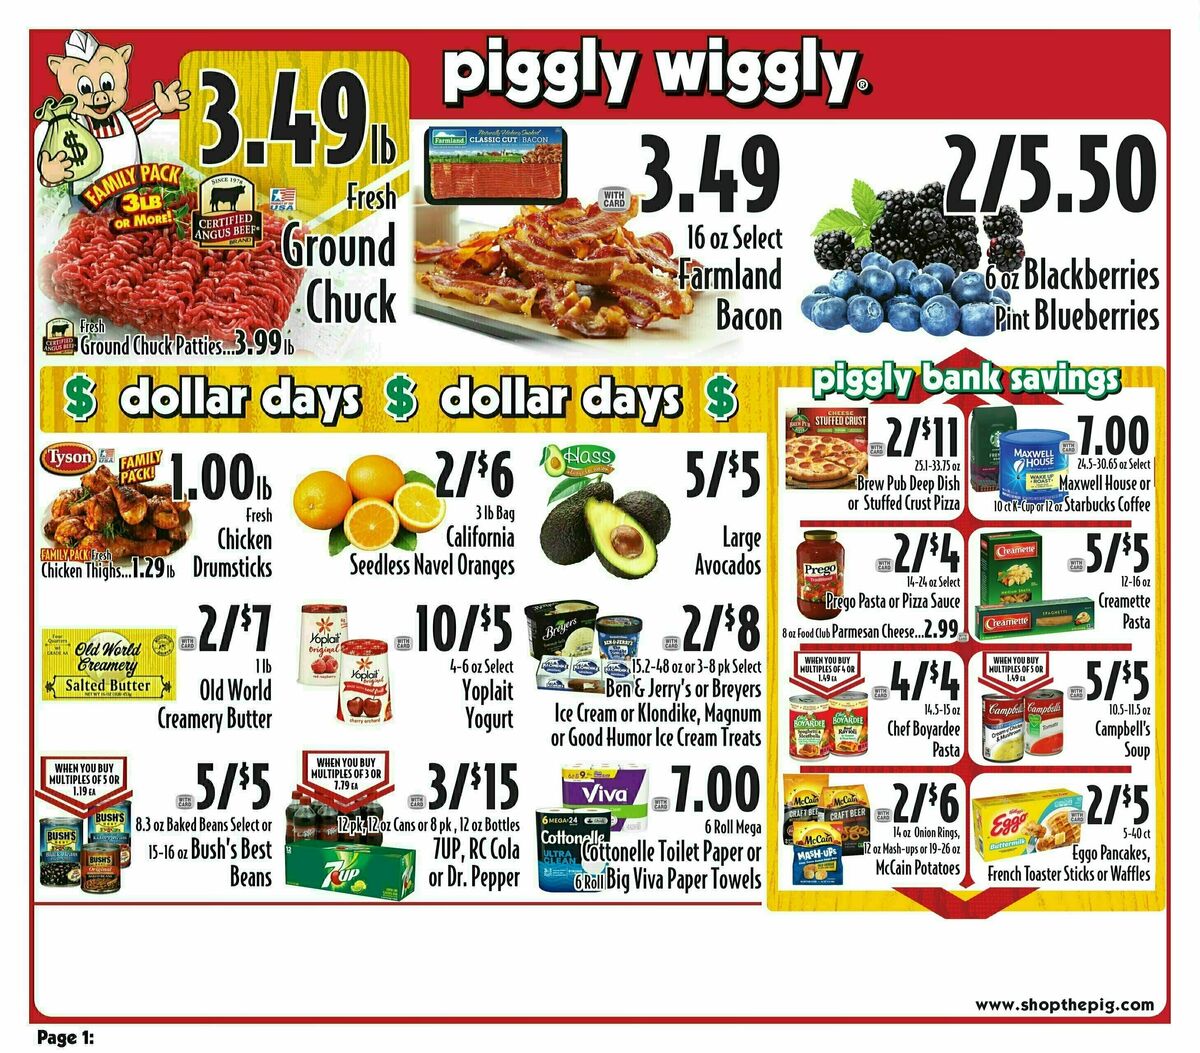 Piggly Wiggly Weekly Ad from January 17